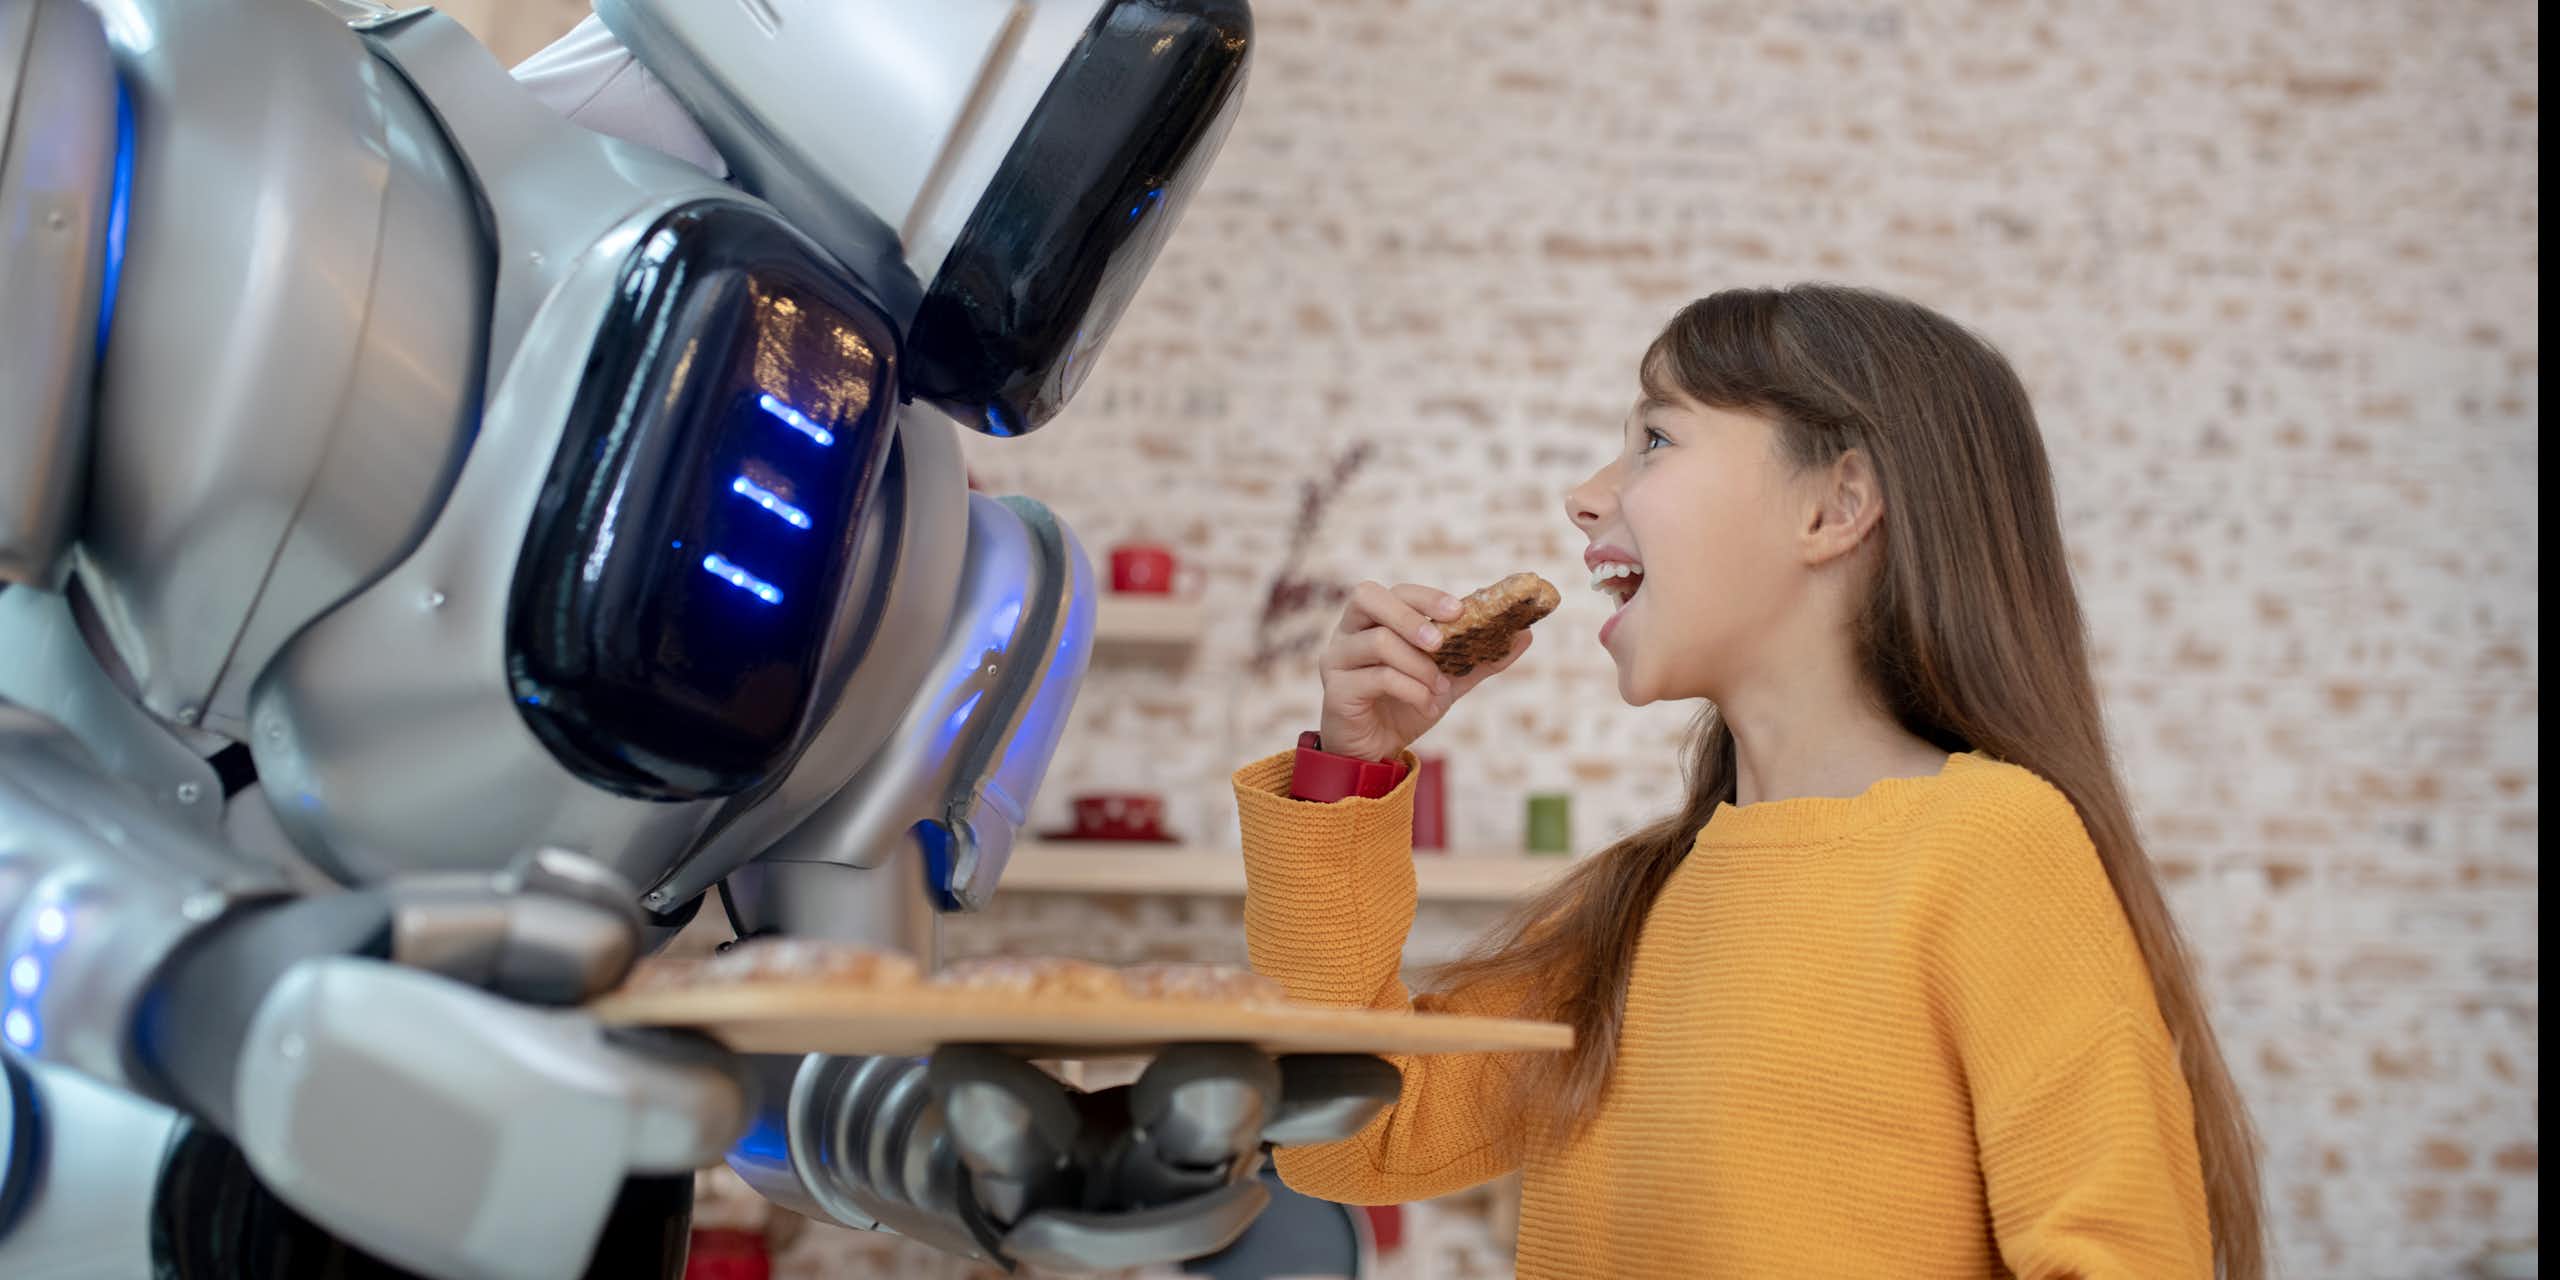 a robot holds a tray of food in front of a girl who is about to take a bite of food she is holding